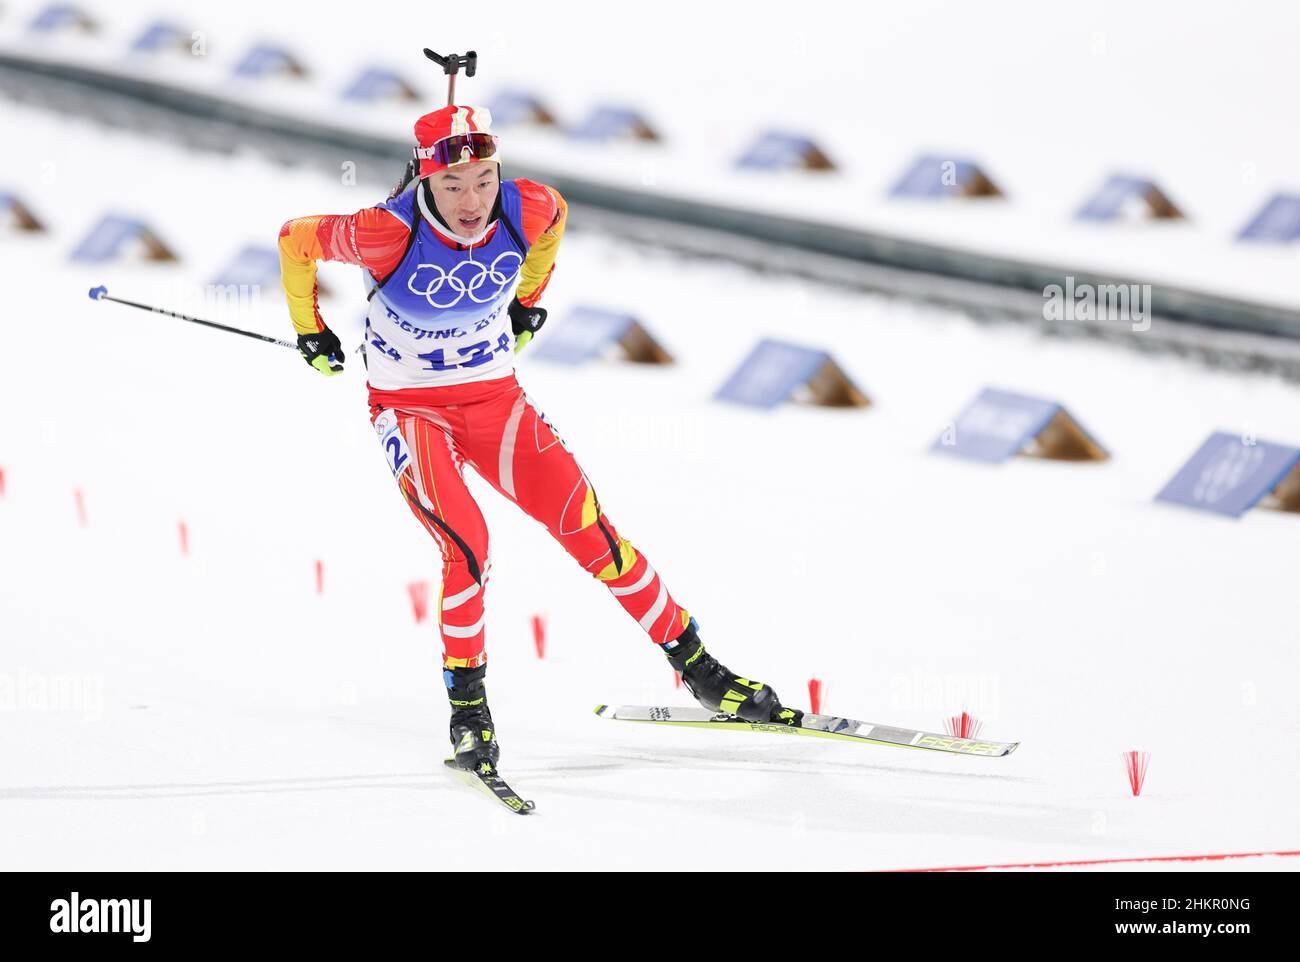 Zhangjiakou, China's Hebei Province. 5th Feb, 2022. Cheng Fangming of China competes during biathlon mixed relay 4x6km (w m) at National Biathlon Centre in Zhangjiakou, north China's Hebei Province, Feb. 5, 2022. Credit: Ding Ting/Xinhua/Alamy Live News Stock Photo